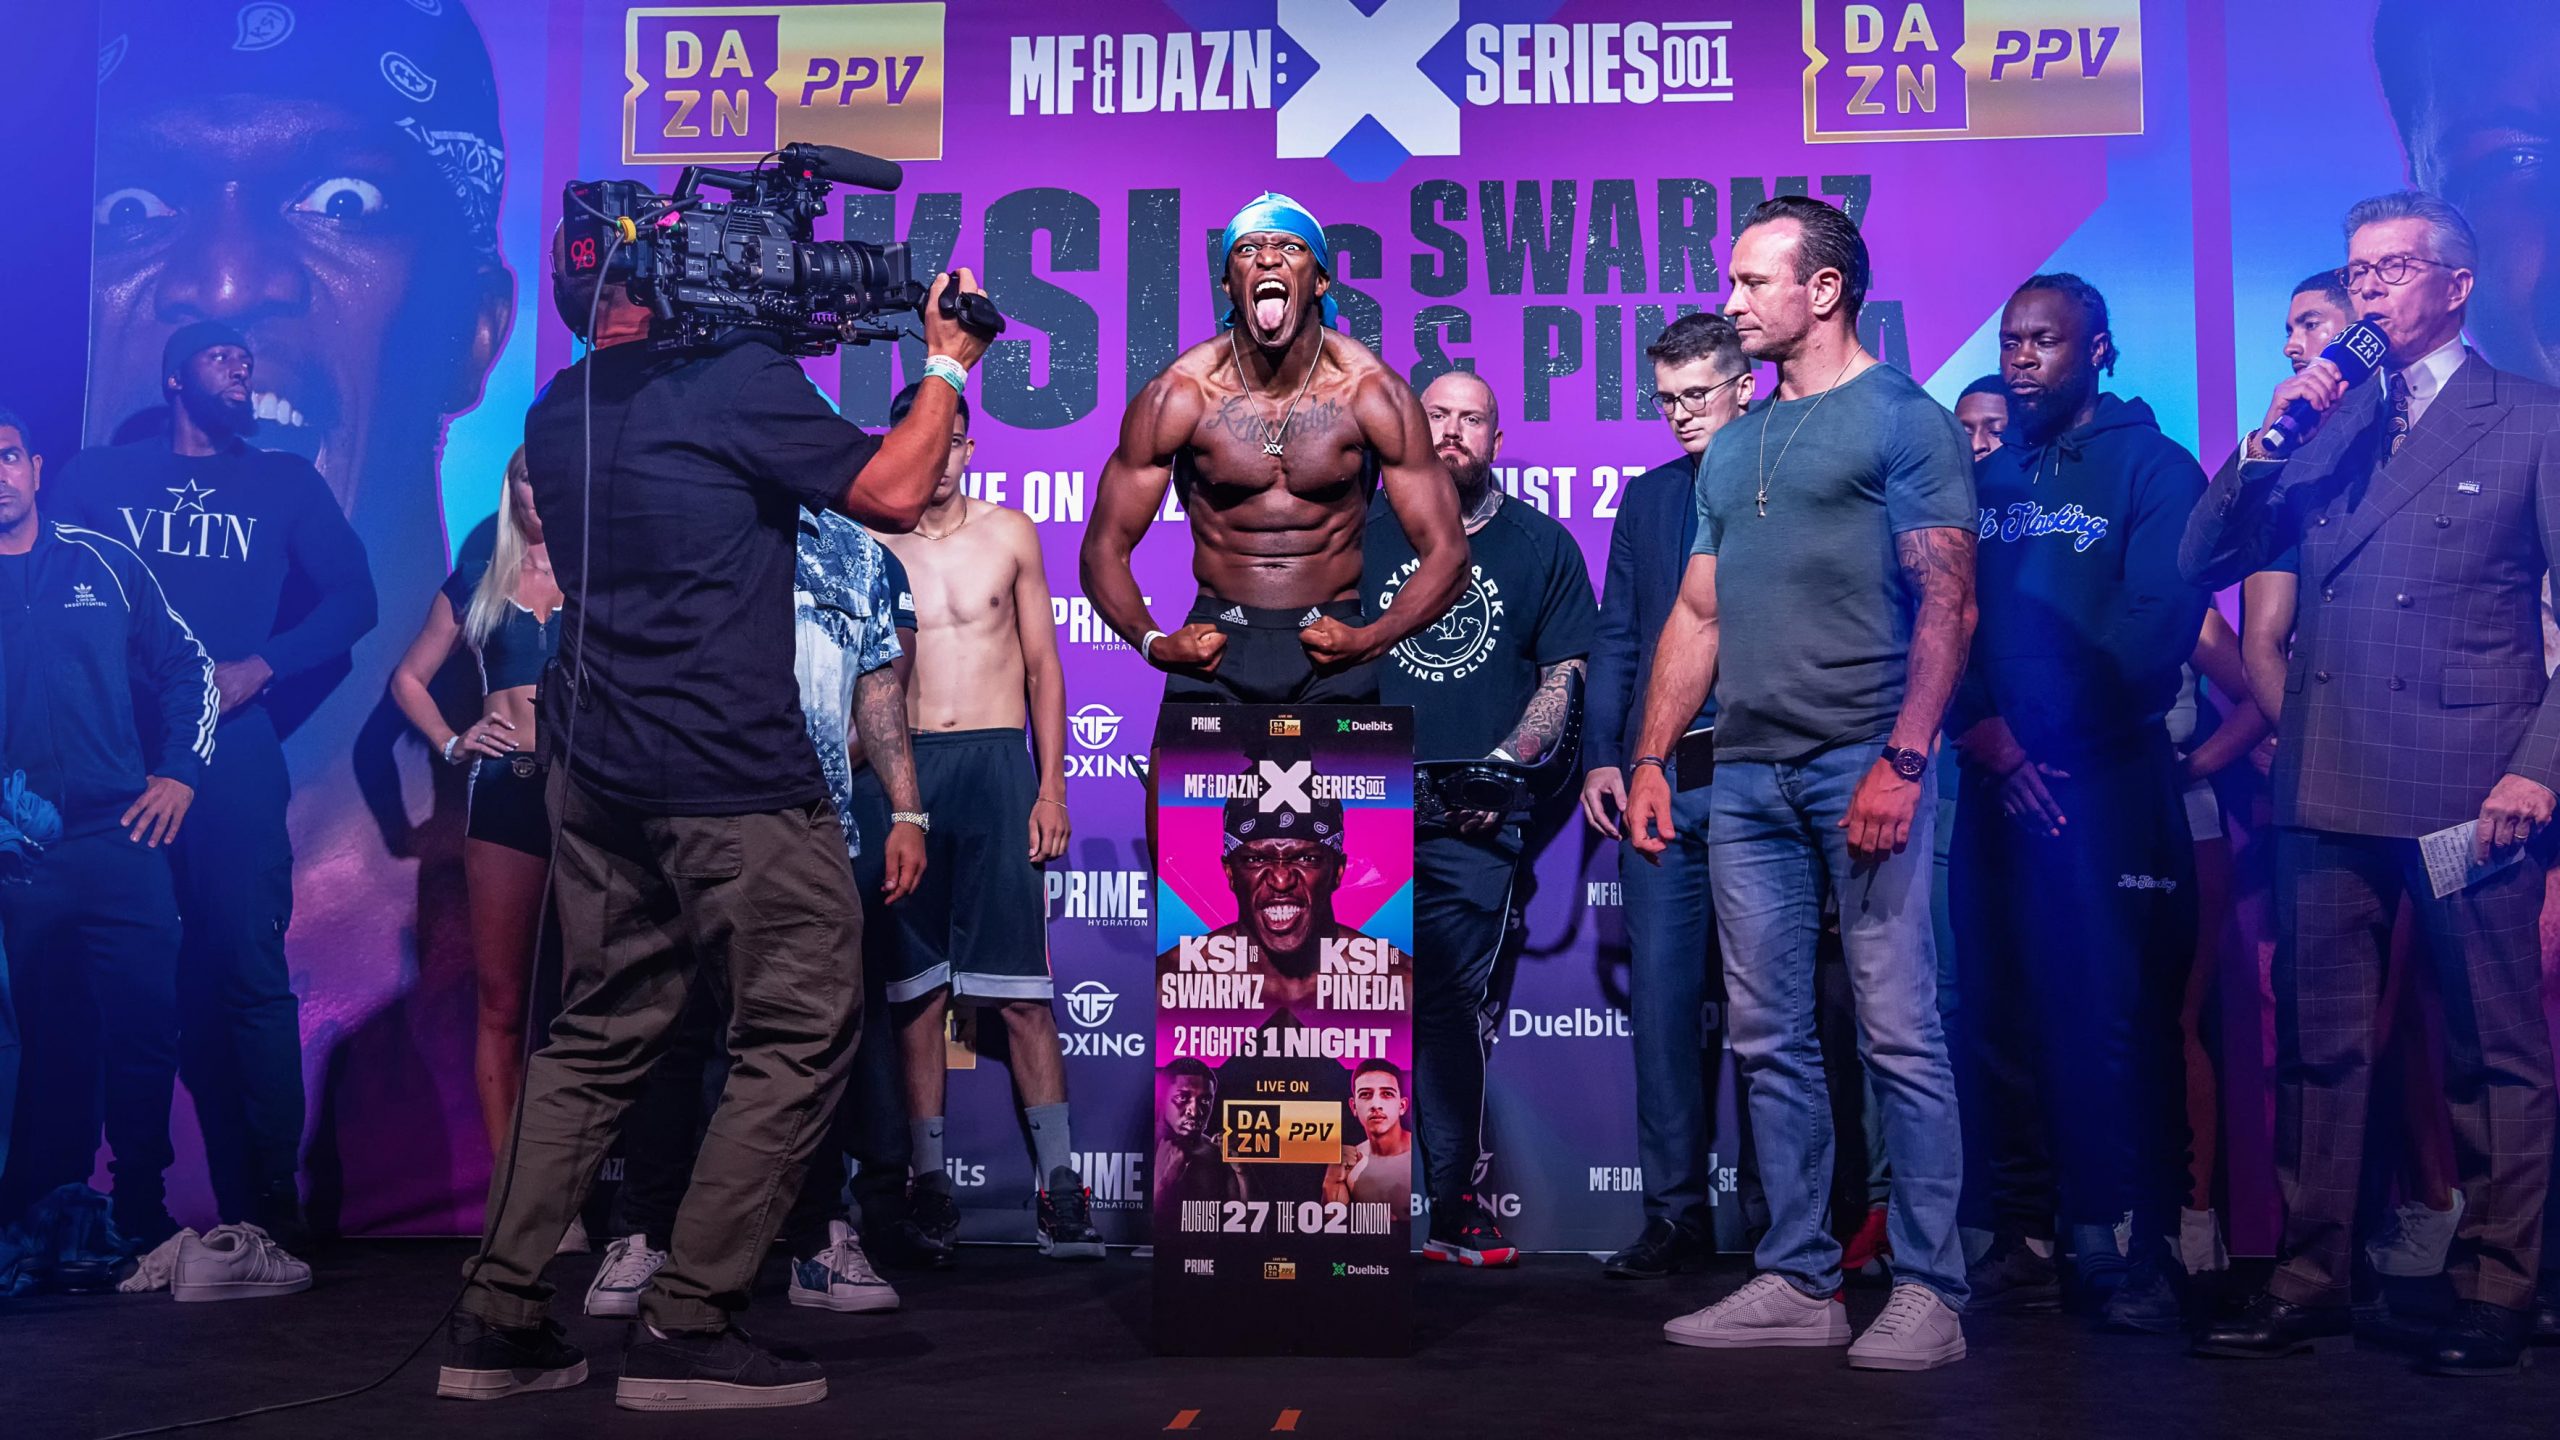 KSI flexes his muscles and sticks his tongue out, roaring, at a weigh-in for a large boxing match. The stage is filled with promoters, other fighters, and camera crews.